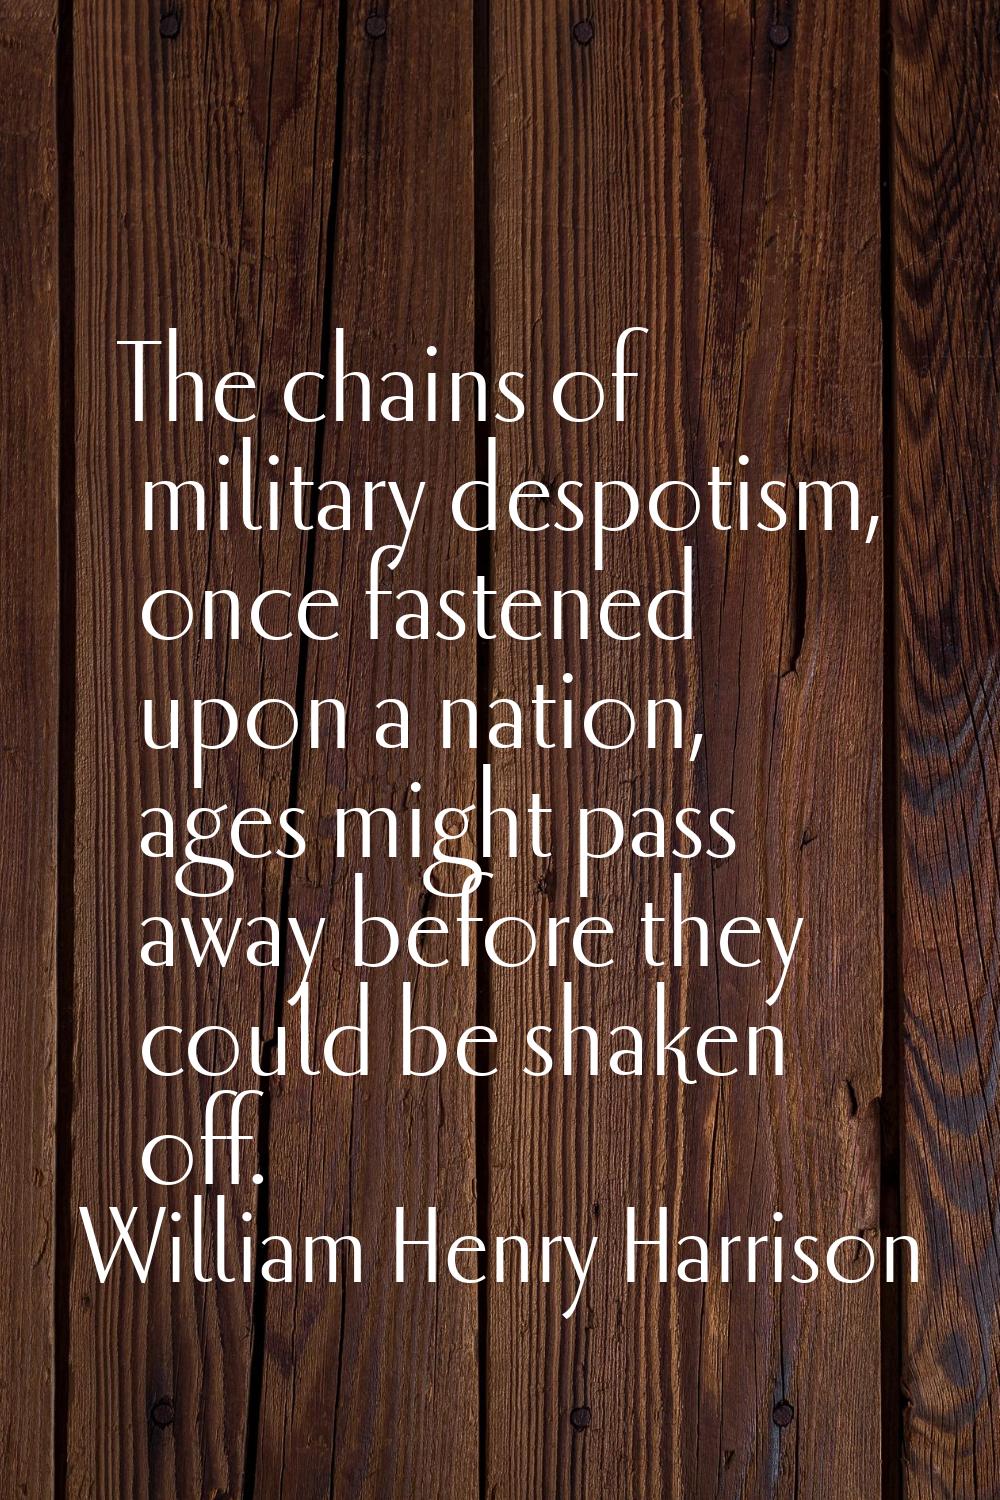 The chains of military despotism, once fastened upon a nation, ages might pass away before they cou